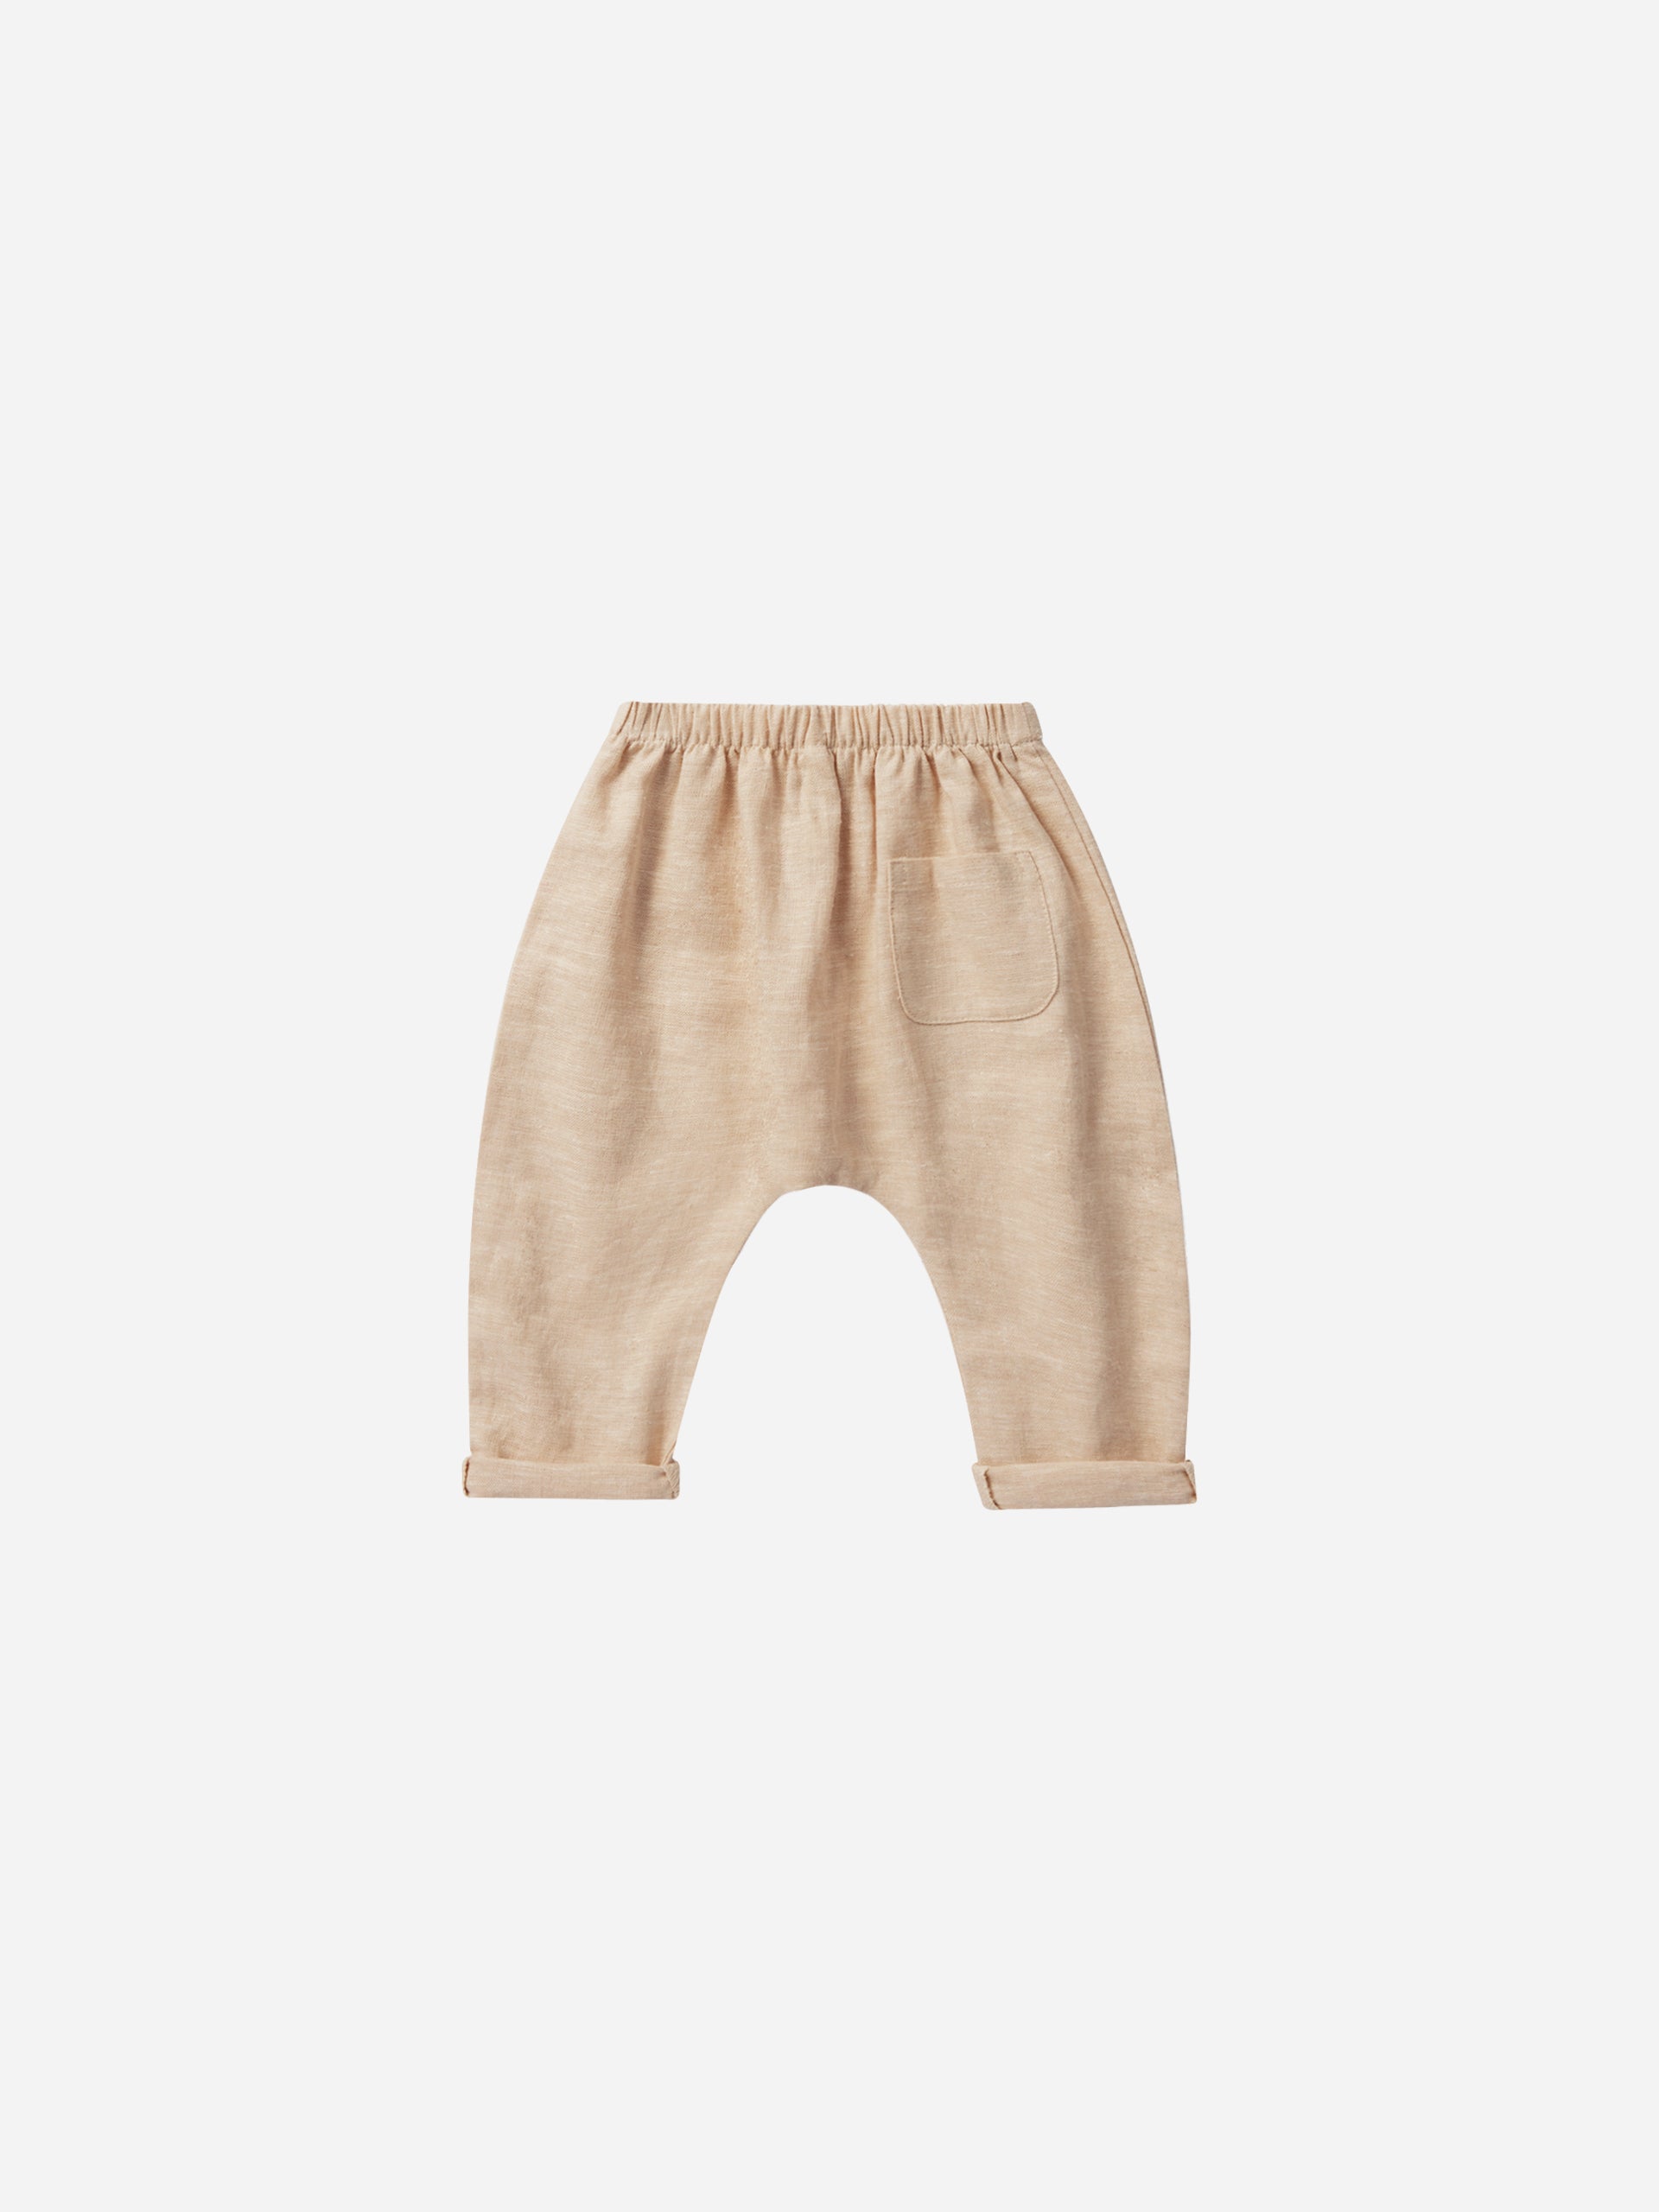 Rowan Pant || Heathered Sand - Rylee + Cru | Kids Clothes | Trendy Baby Clothes | Modern Infant Outfits |